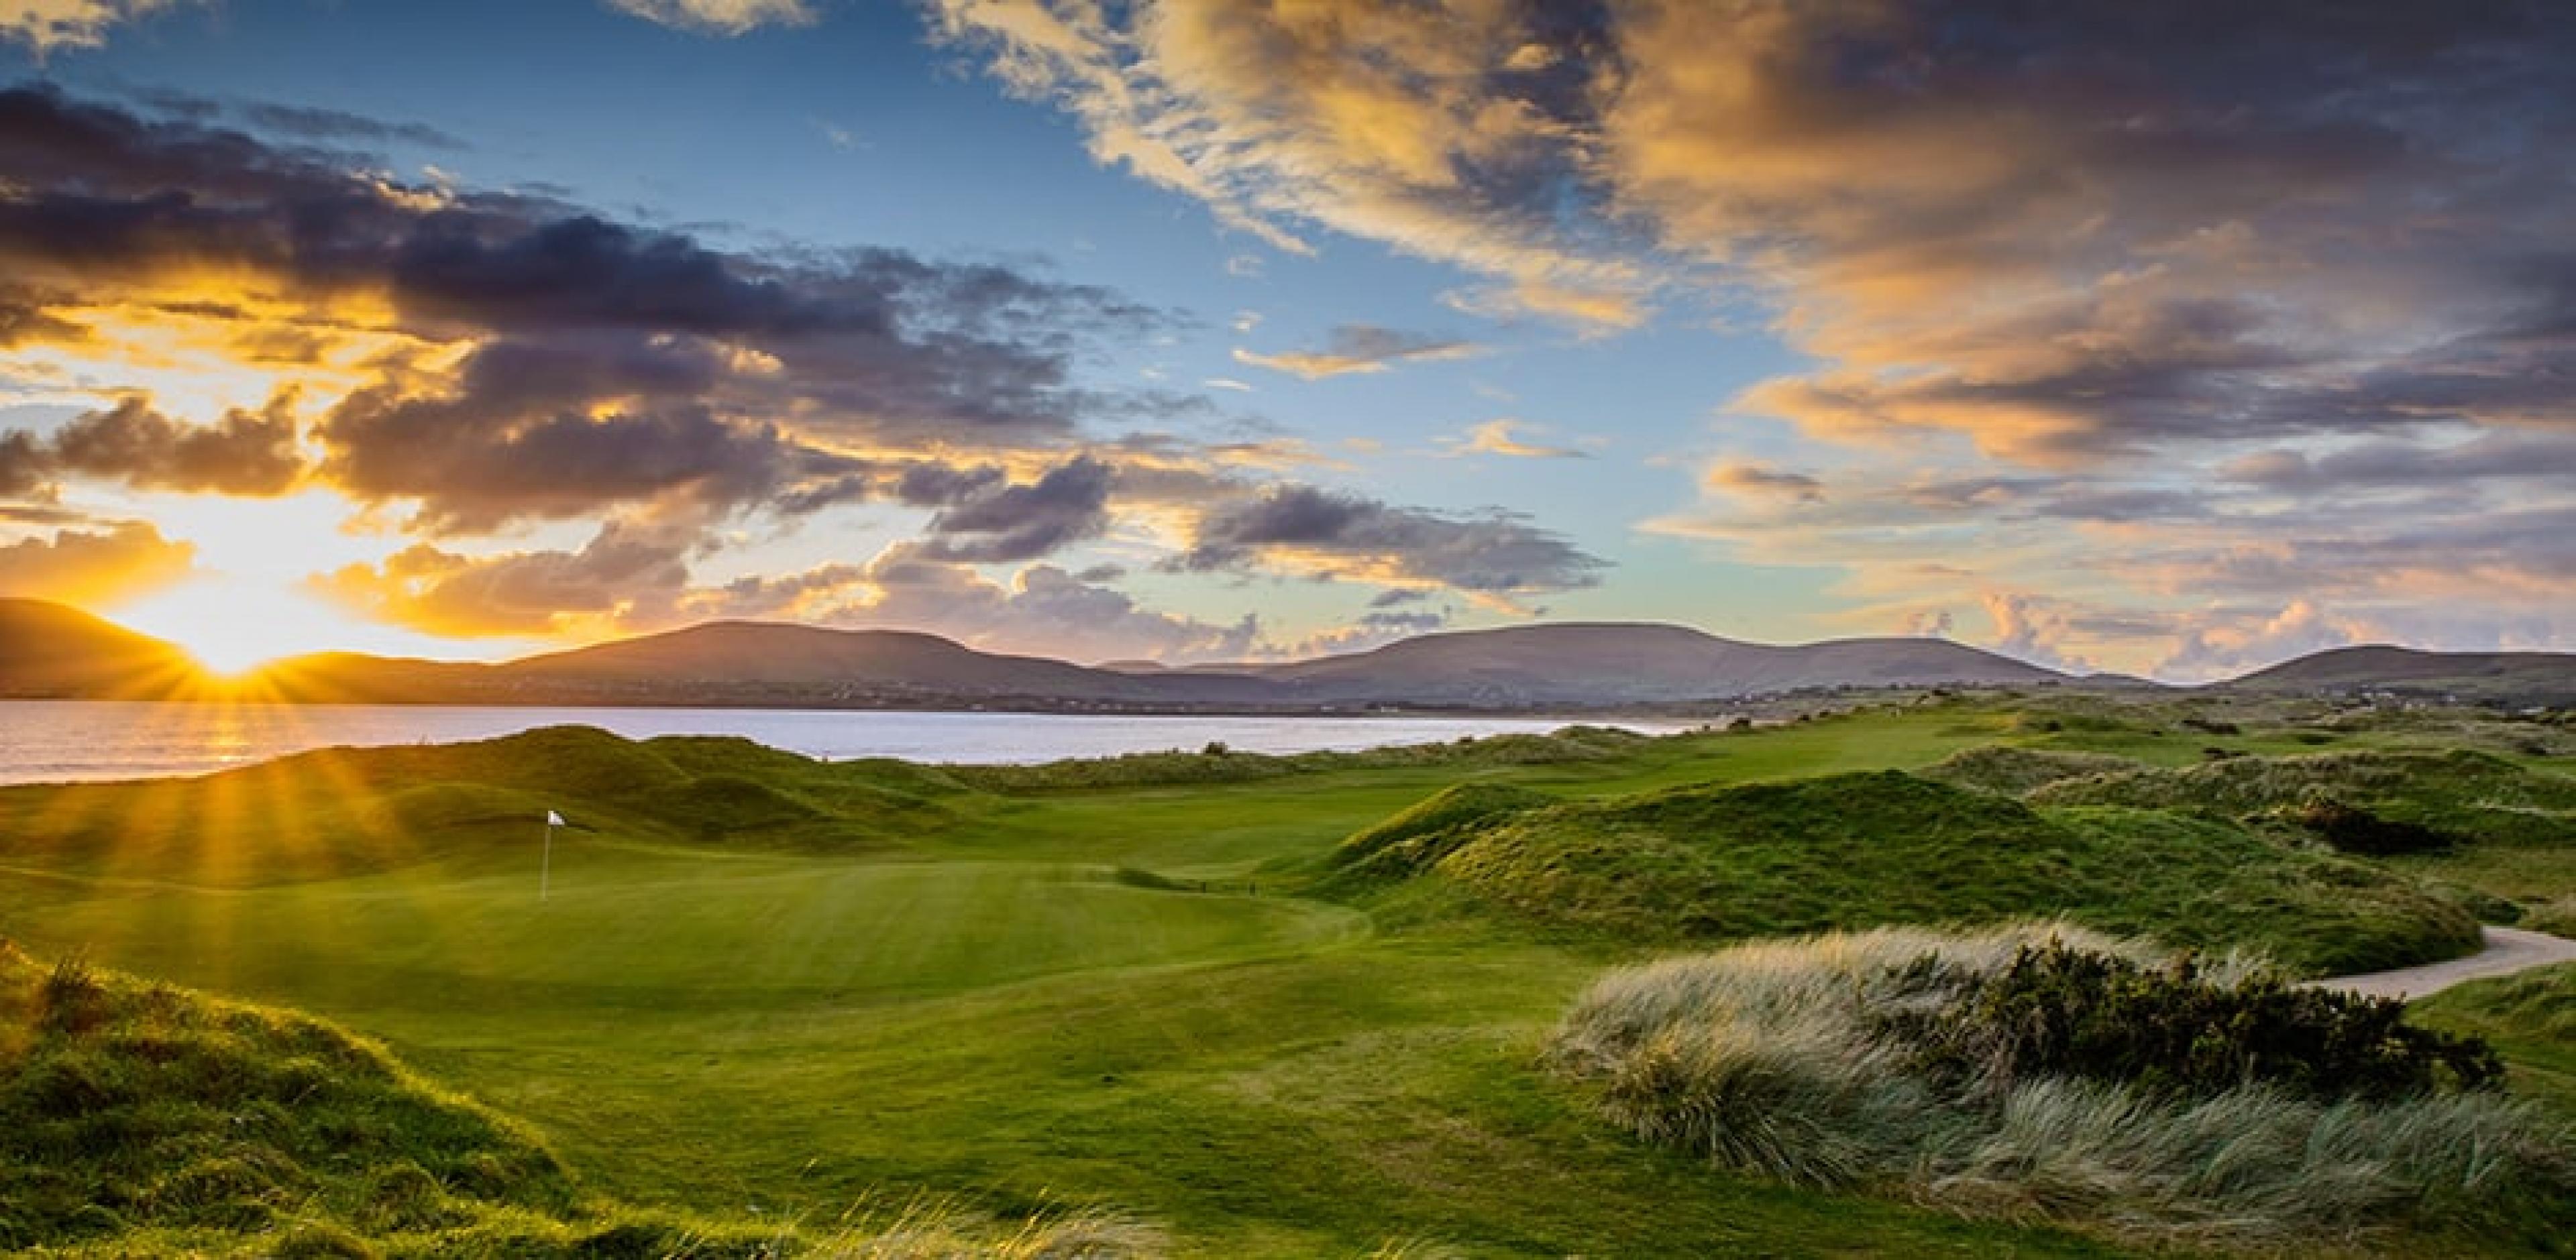 The 18th Hole at Waterville Golf Club, facing O'Grady's Beach. Courtesy Waterville Golf Club